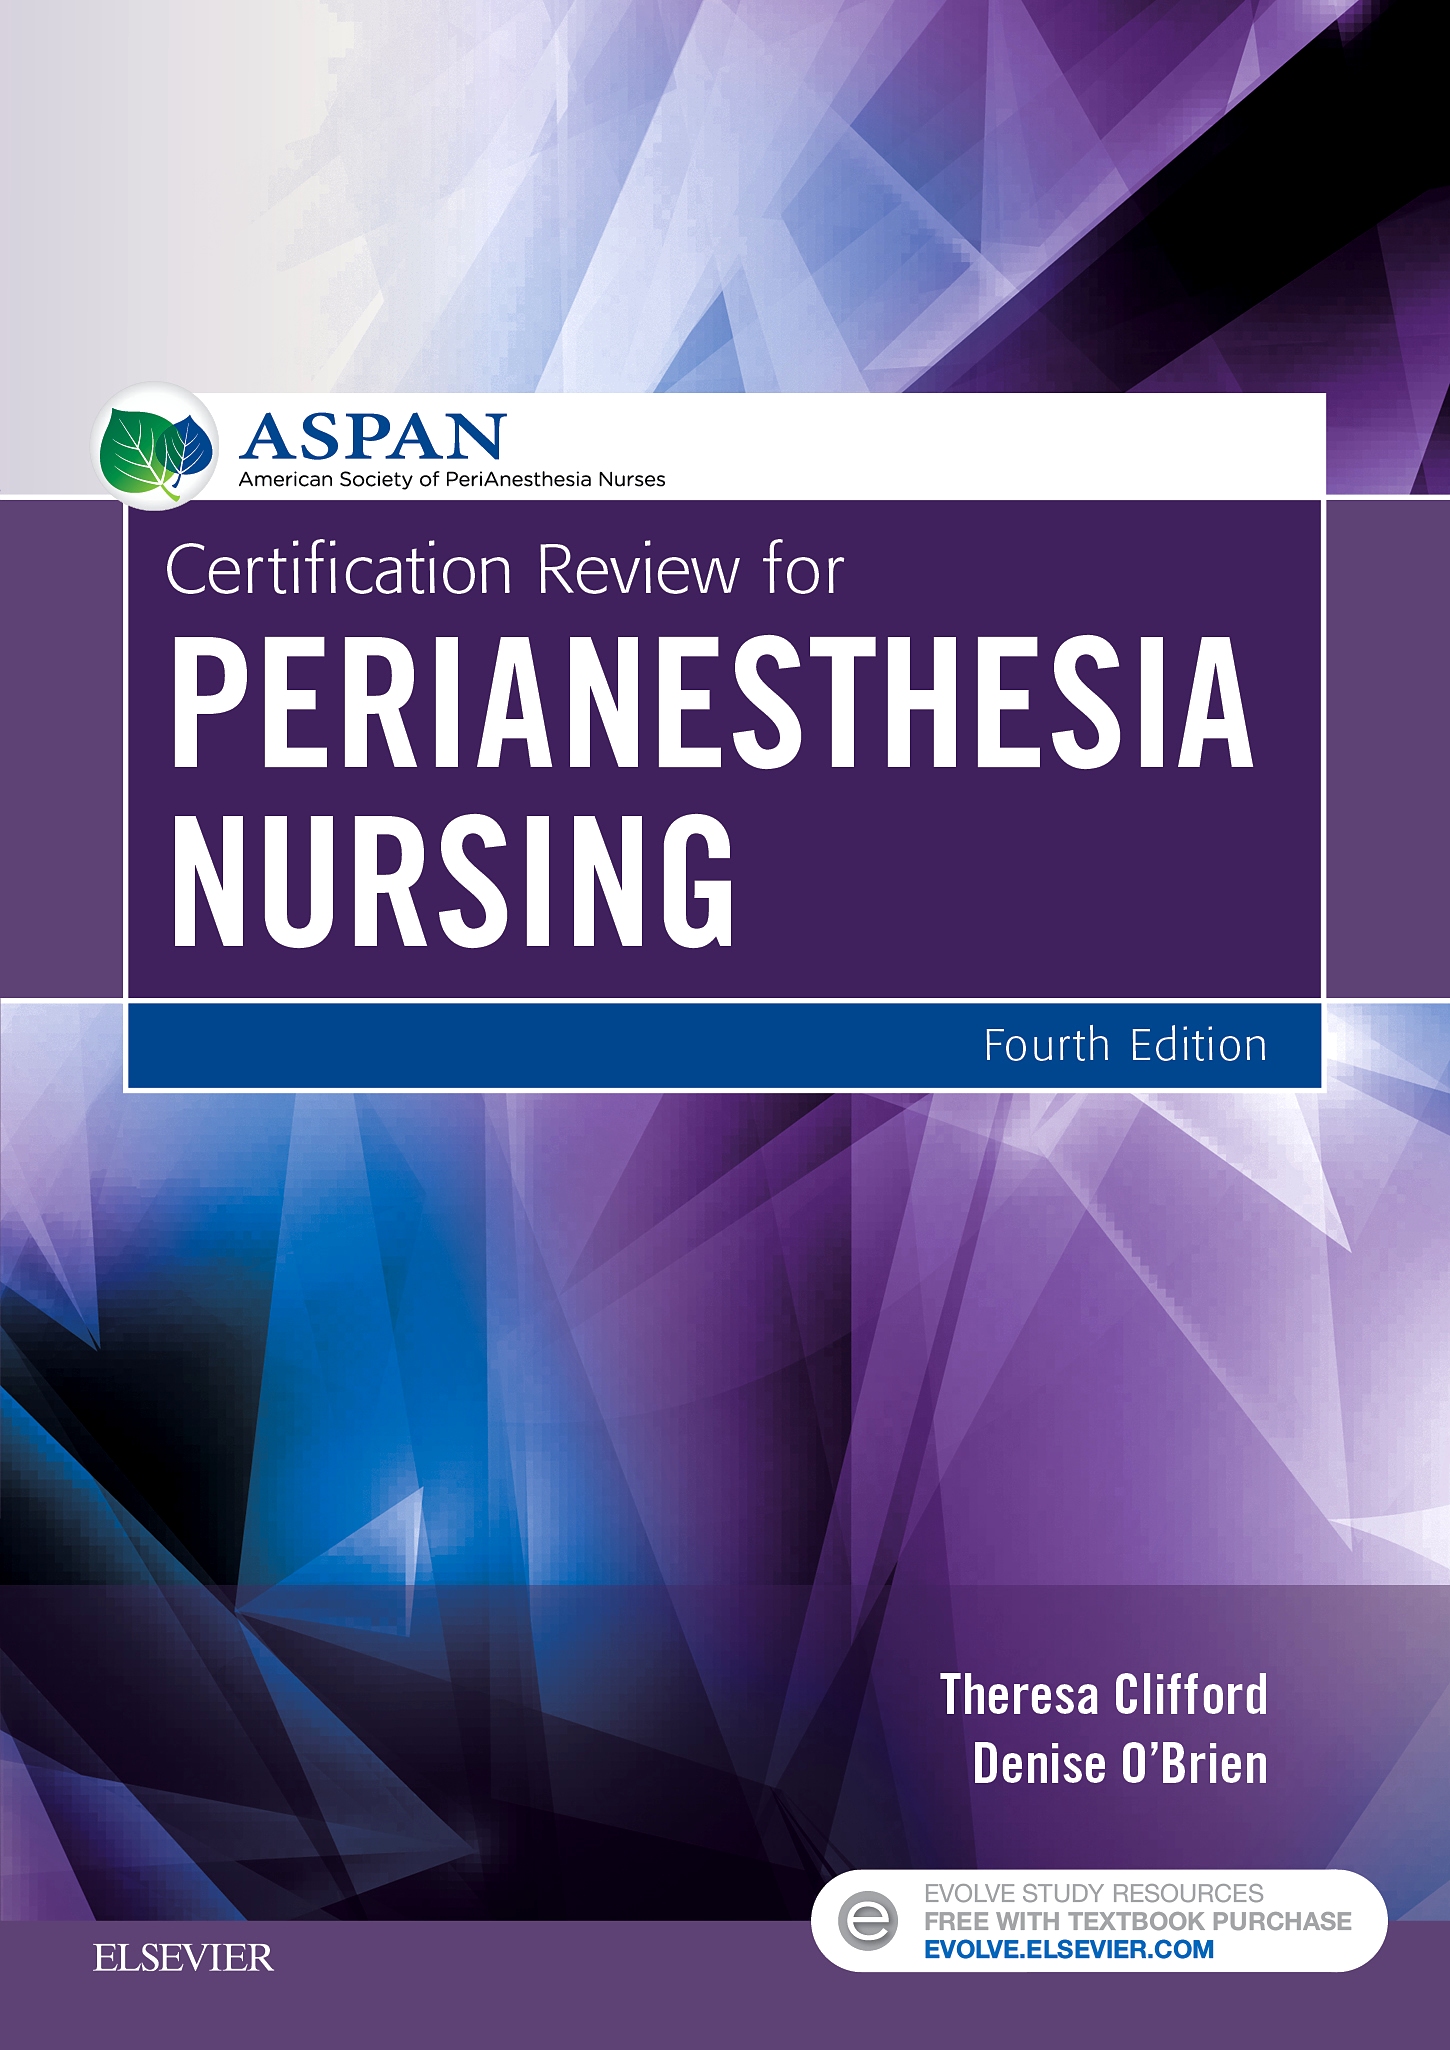 Evolve Resources for Certification Review for PeriAnesthesia Nursing, 4th Edition